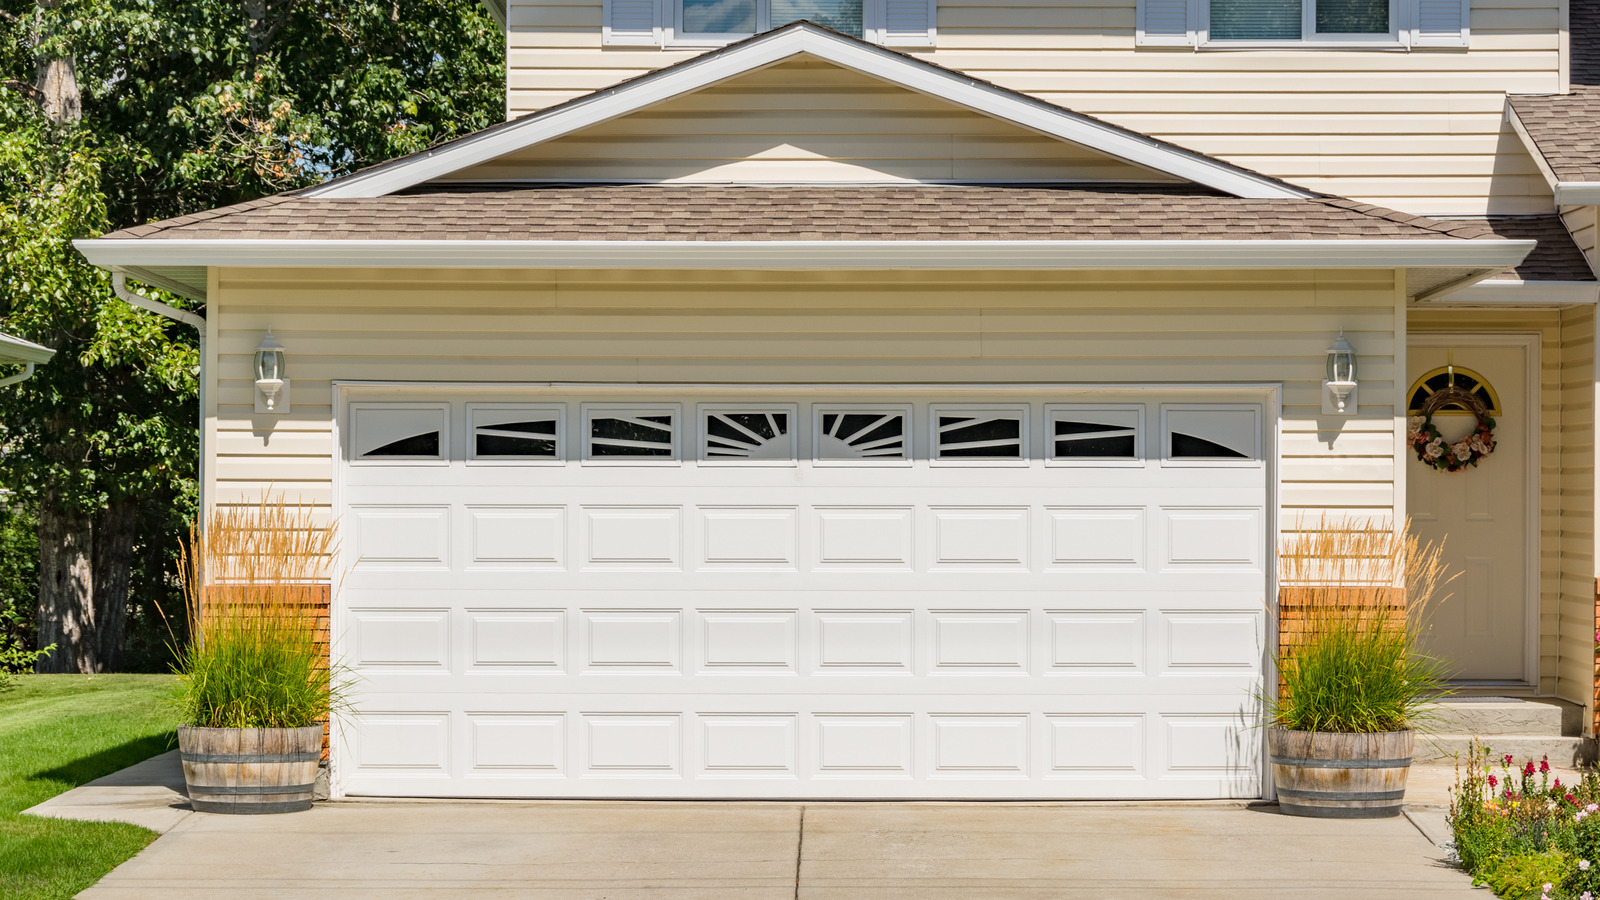 What is the Best Freezer to Keep in Your Garage? - Danley's Garages